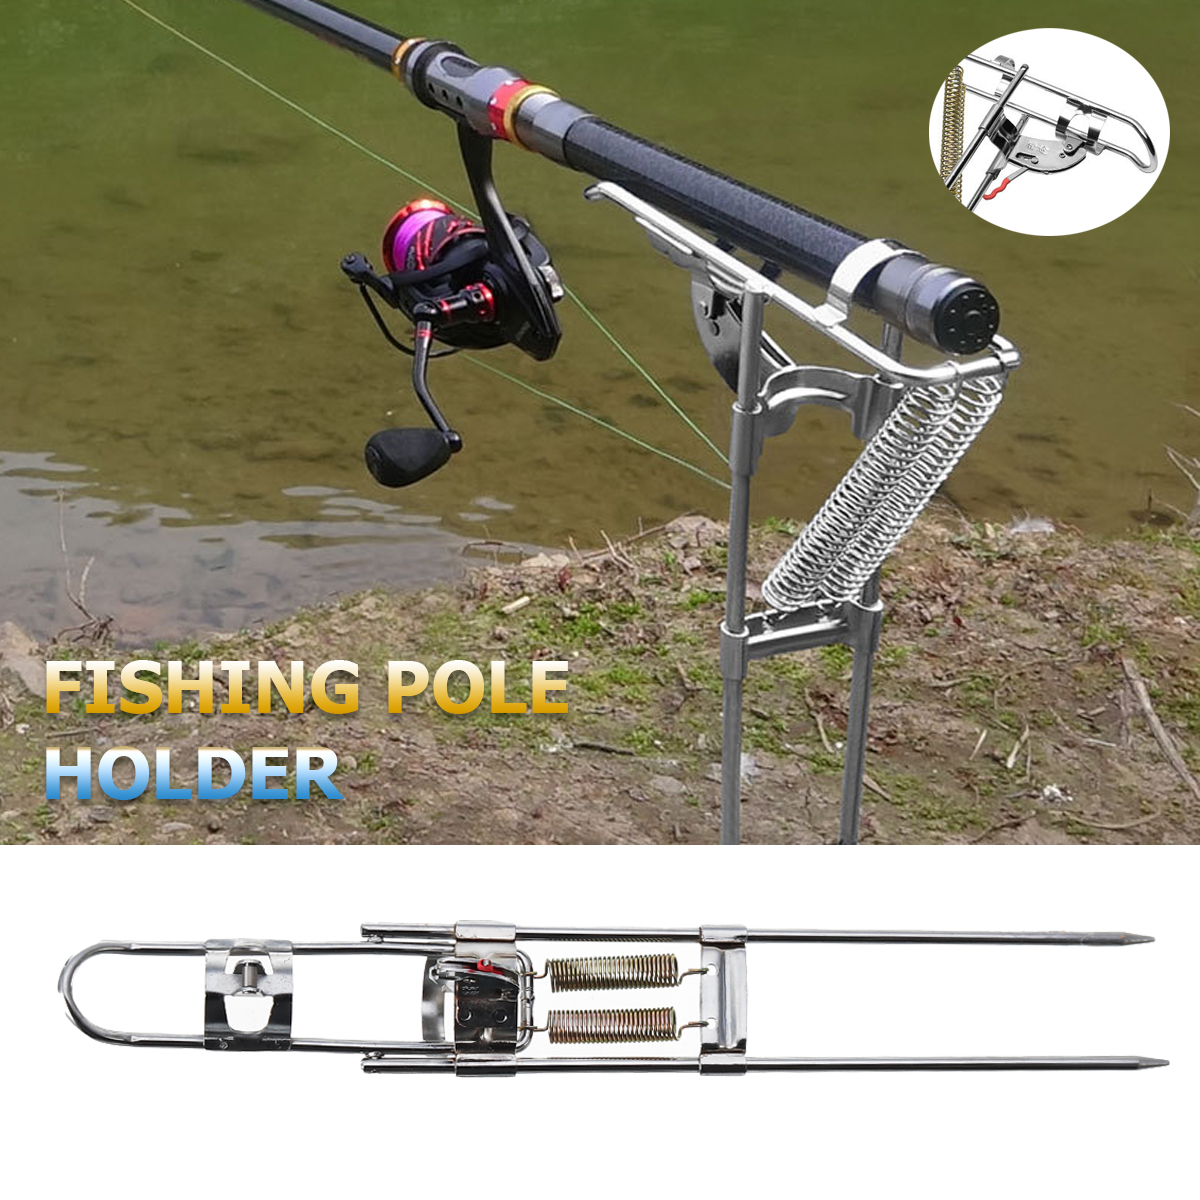 Details about   2pcs Adjustable Angle Direction Fishing Rod Holders Metal Ground Support Stands 